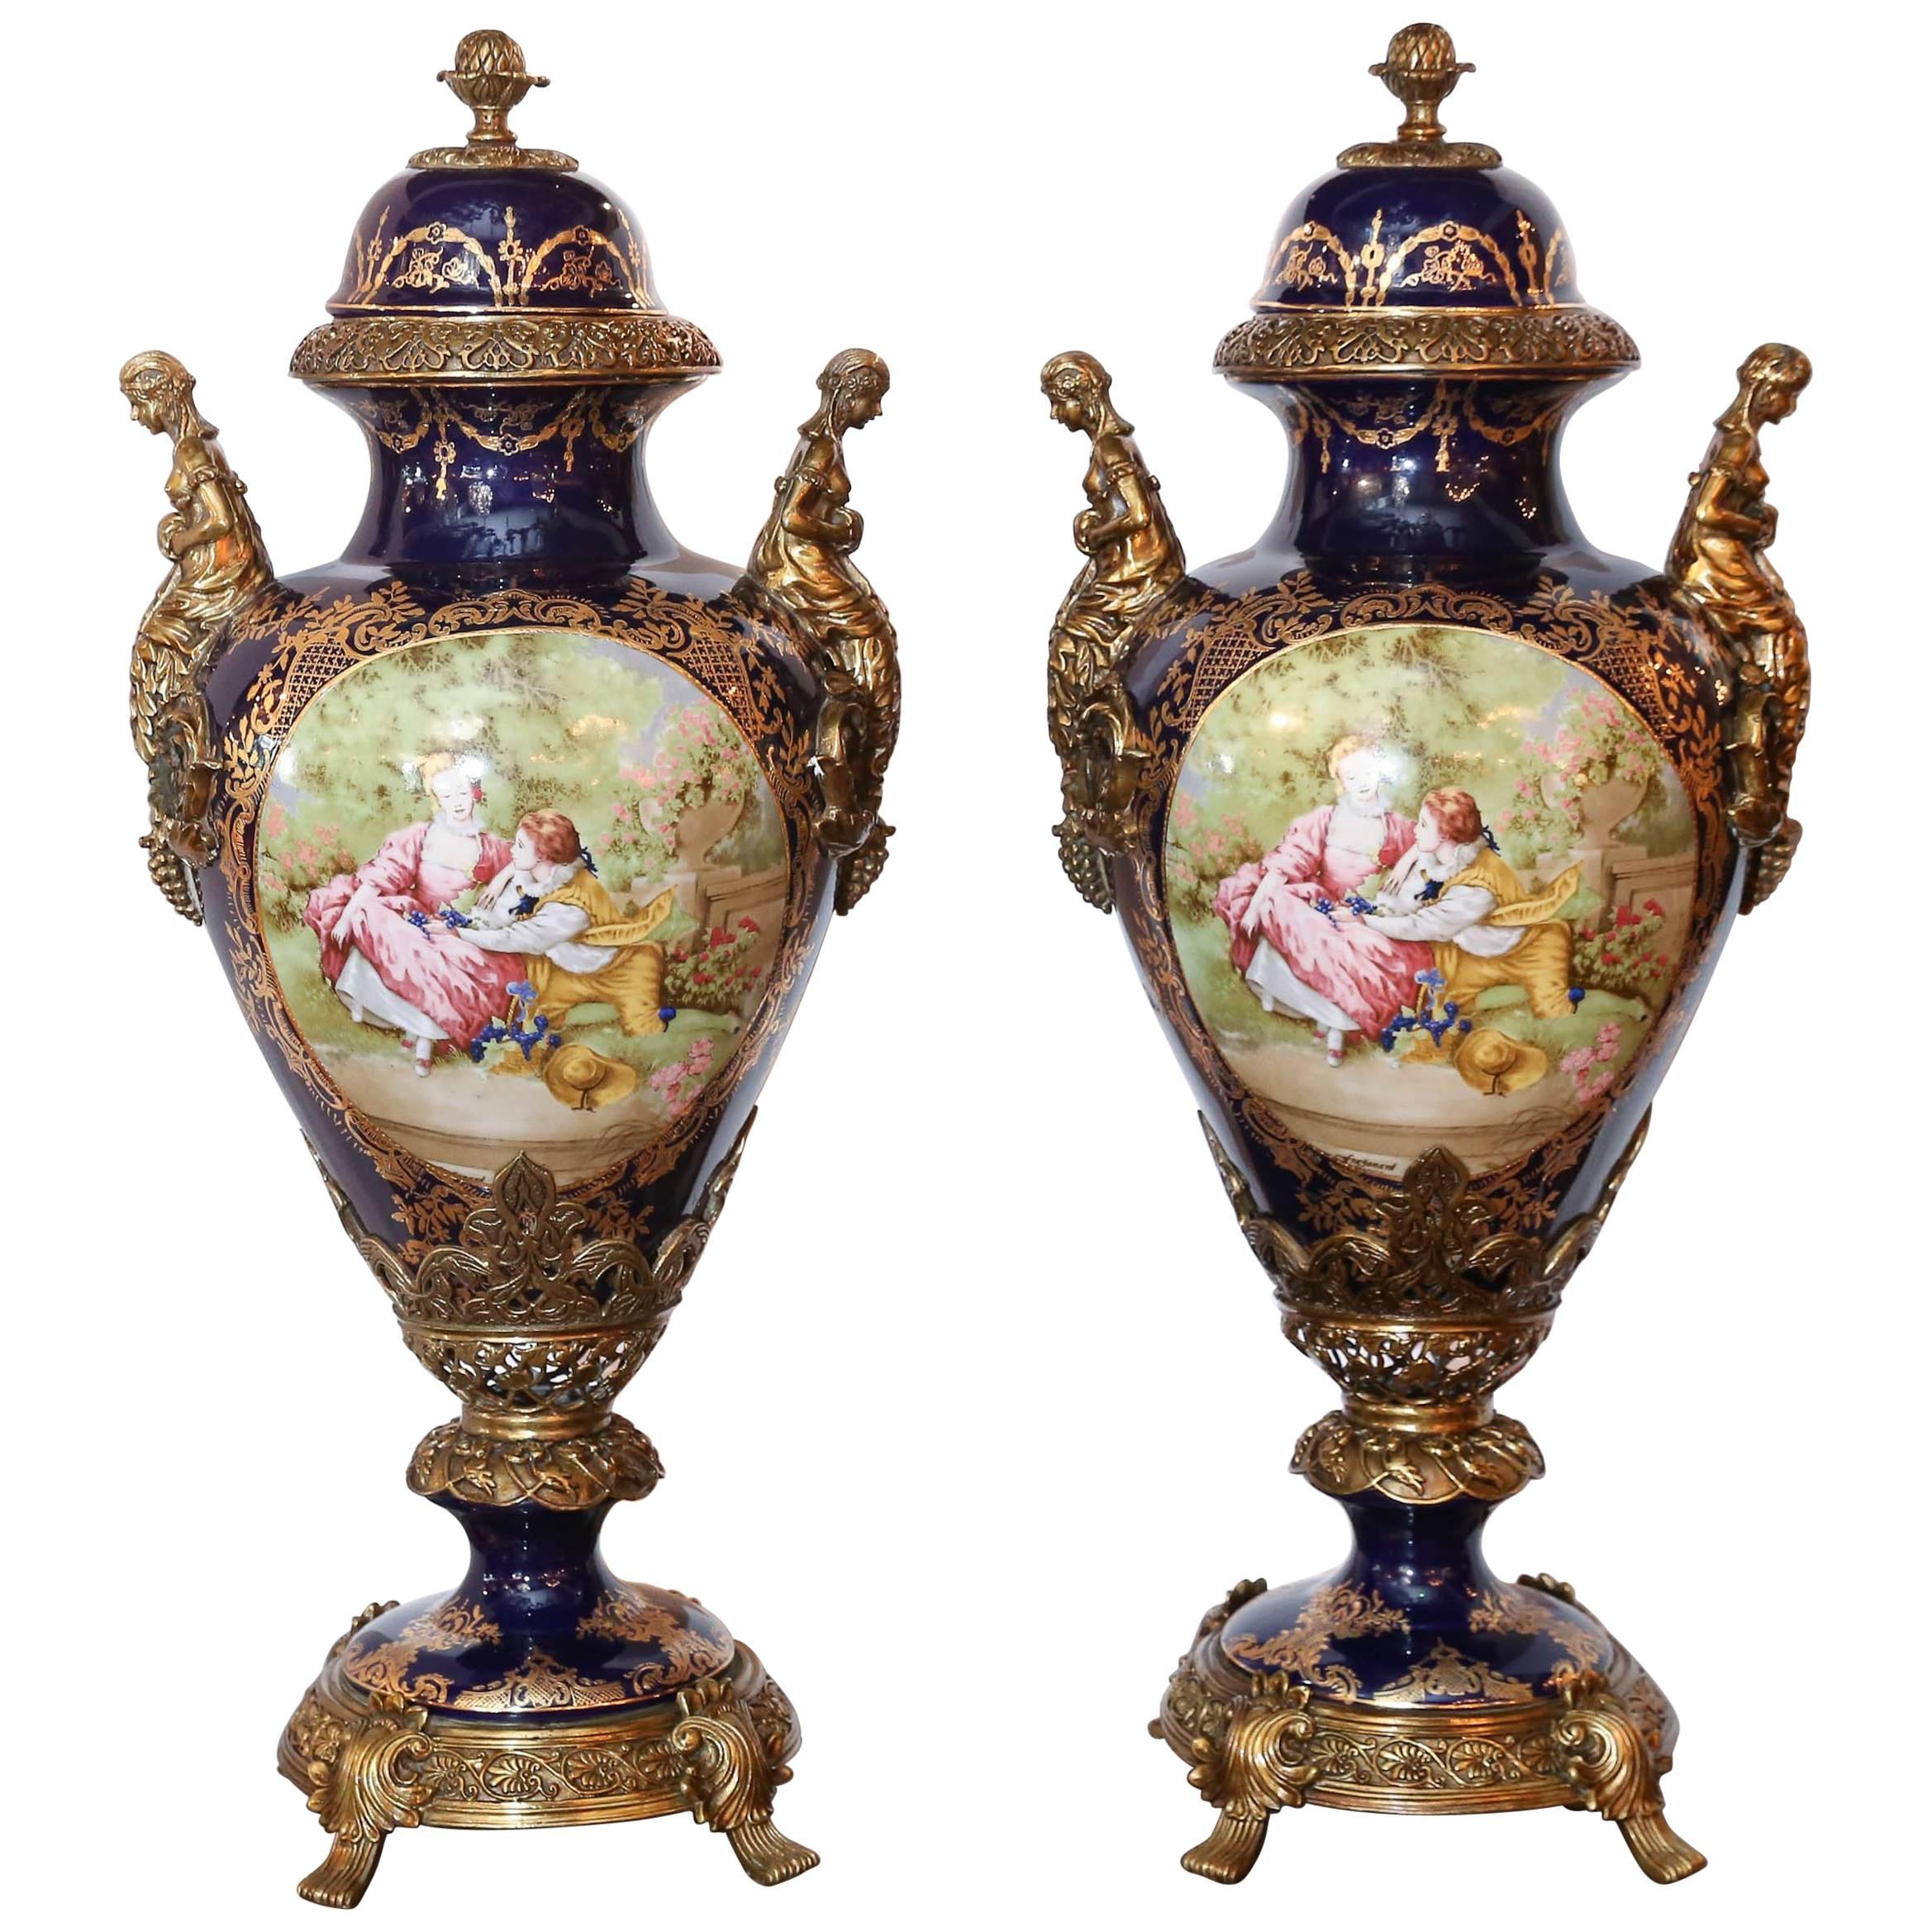 Pair of Large Porcelain Lidded Urns, Bronze Mounted and Gilt Decorated